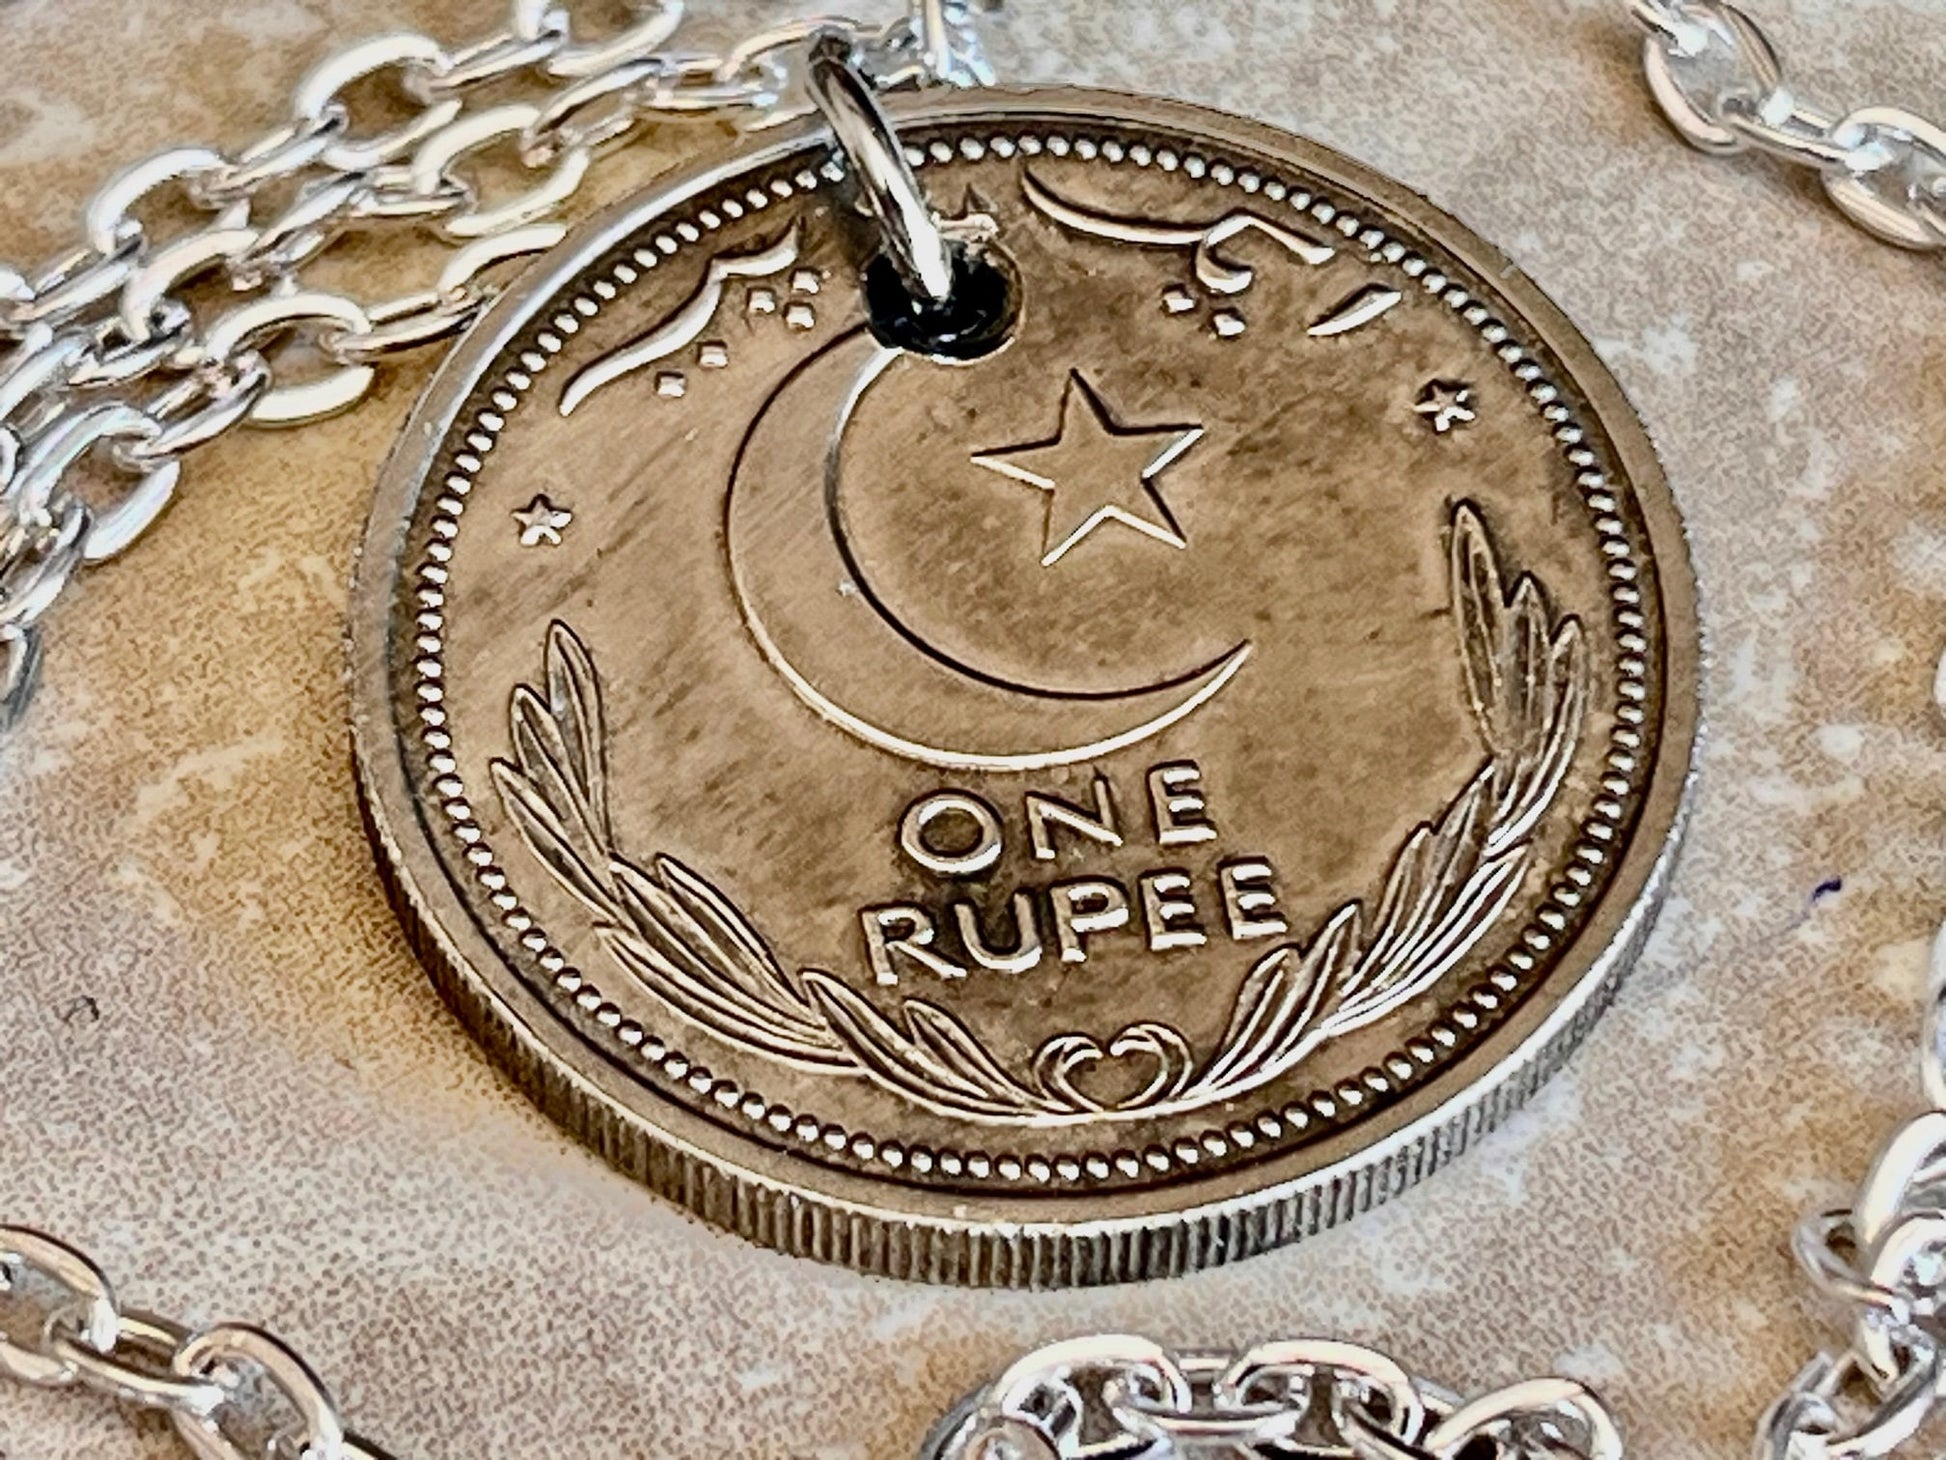 Pakistan Coin Pendant Pakistani One Rupee Personal Necklace Old Vintage Handmade Jewelry Gift Friend Charm For Him Her World Coin Collector